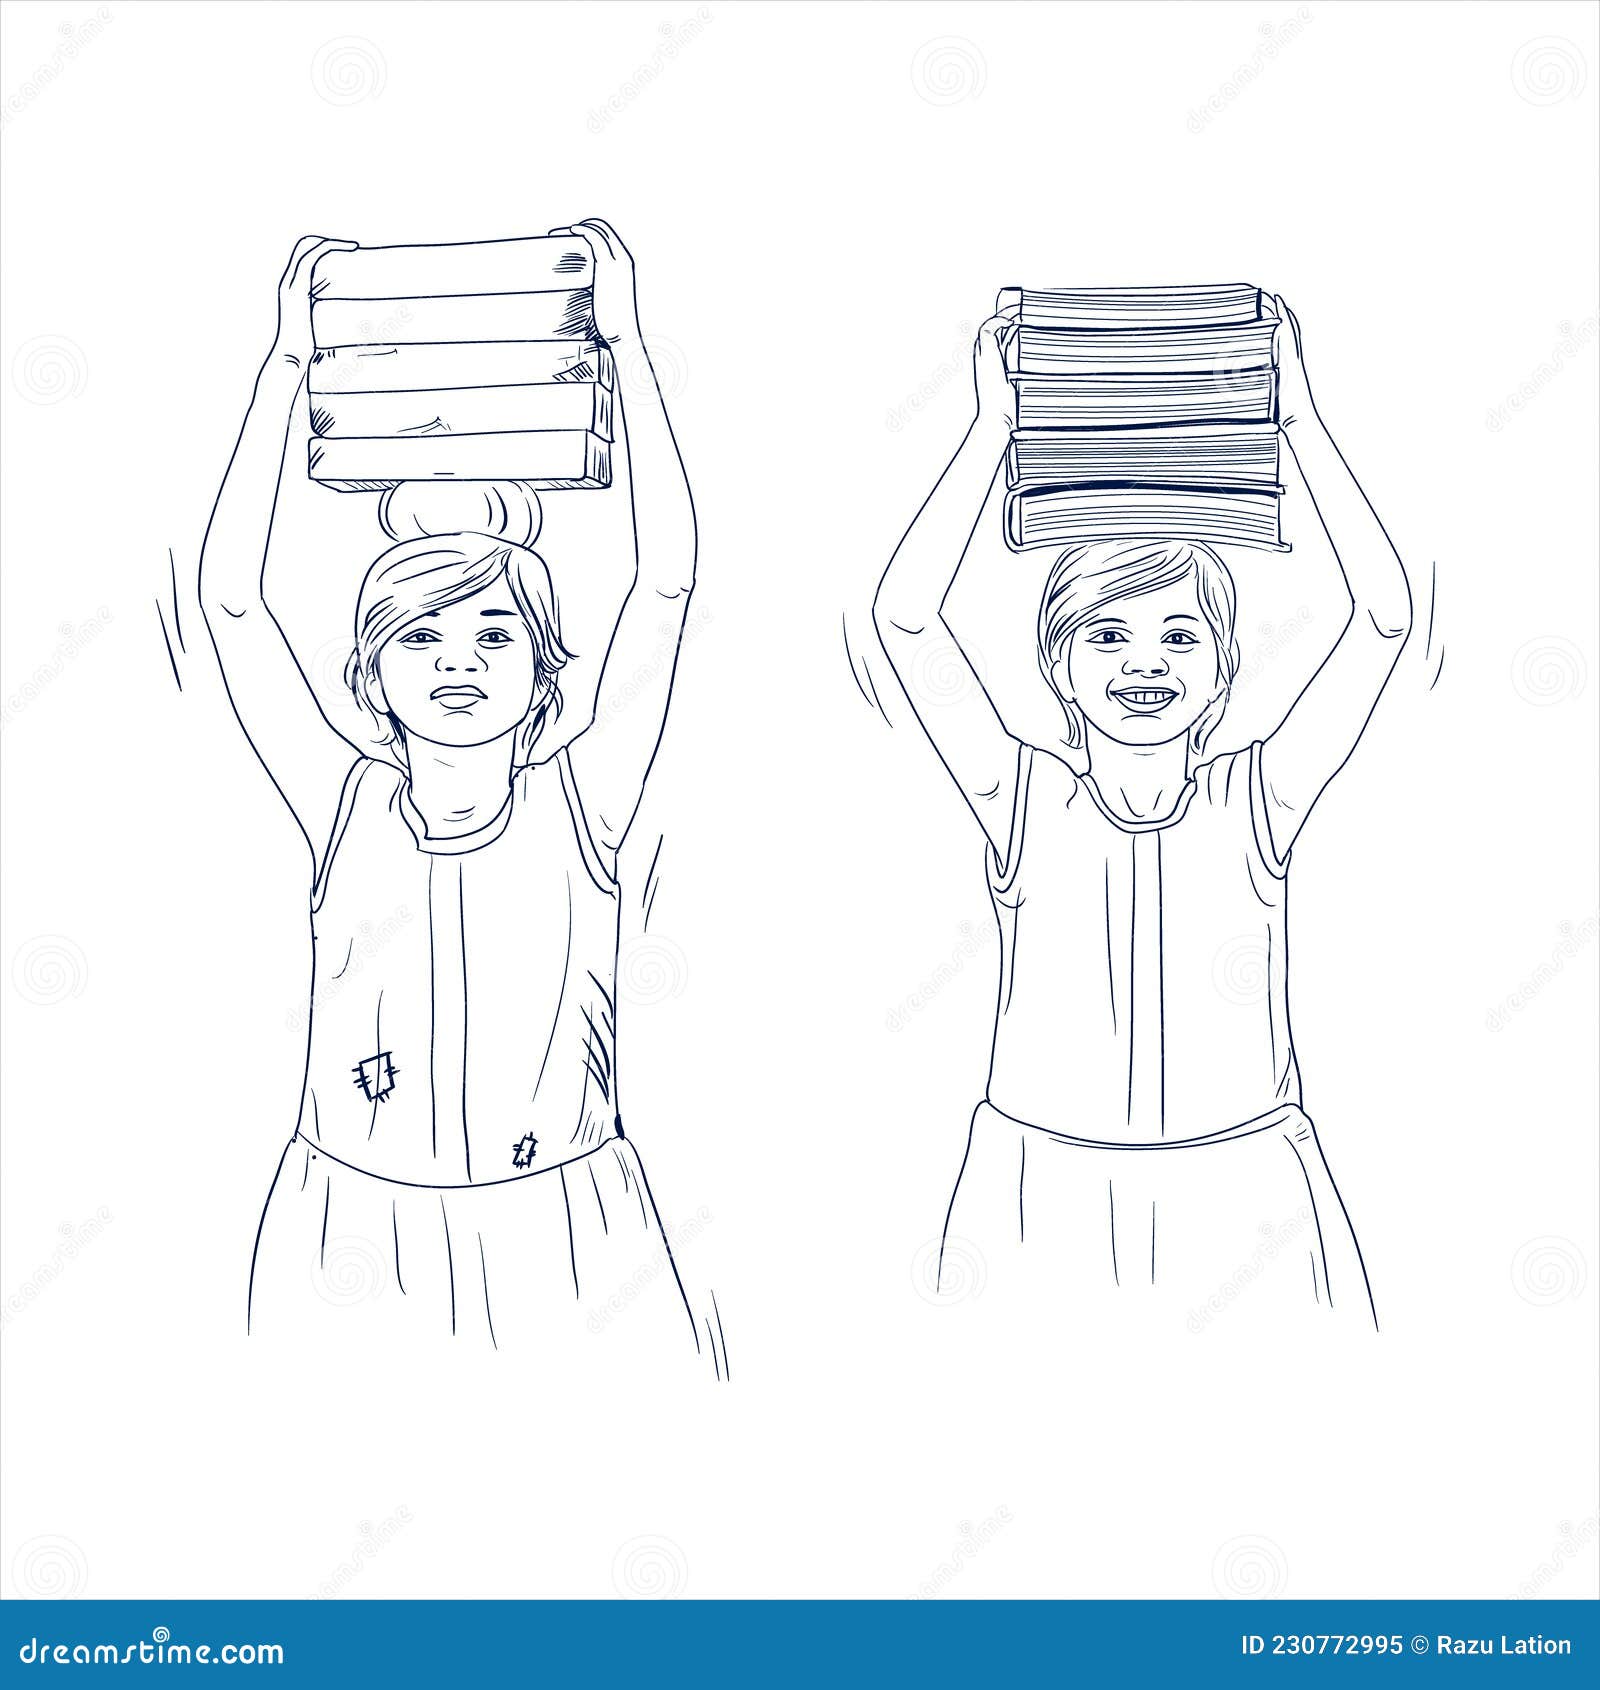 Child labor day concept in line art drawing sketch illustration Poor vs  rich kid concept labour day creative concept illustration student vs labor  idea build childrens future the smile on kids 9275649